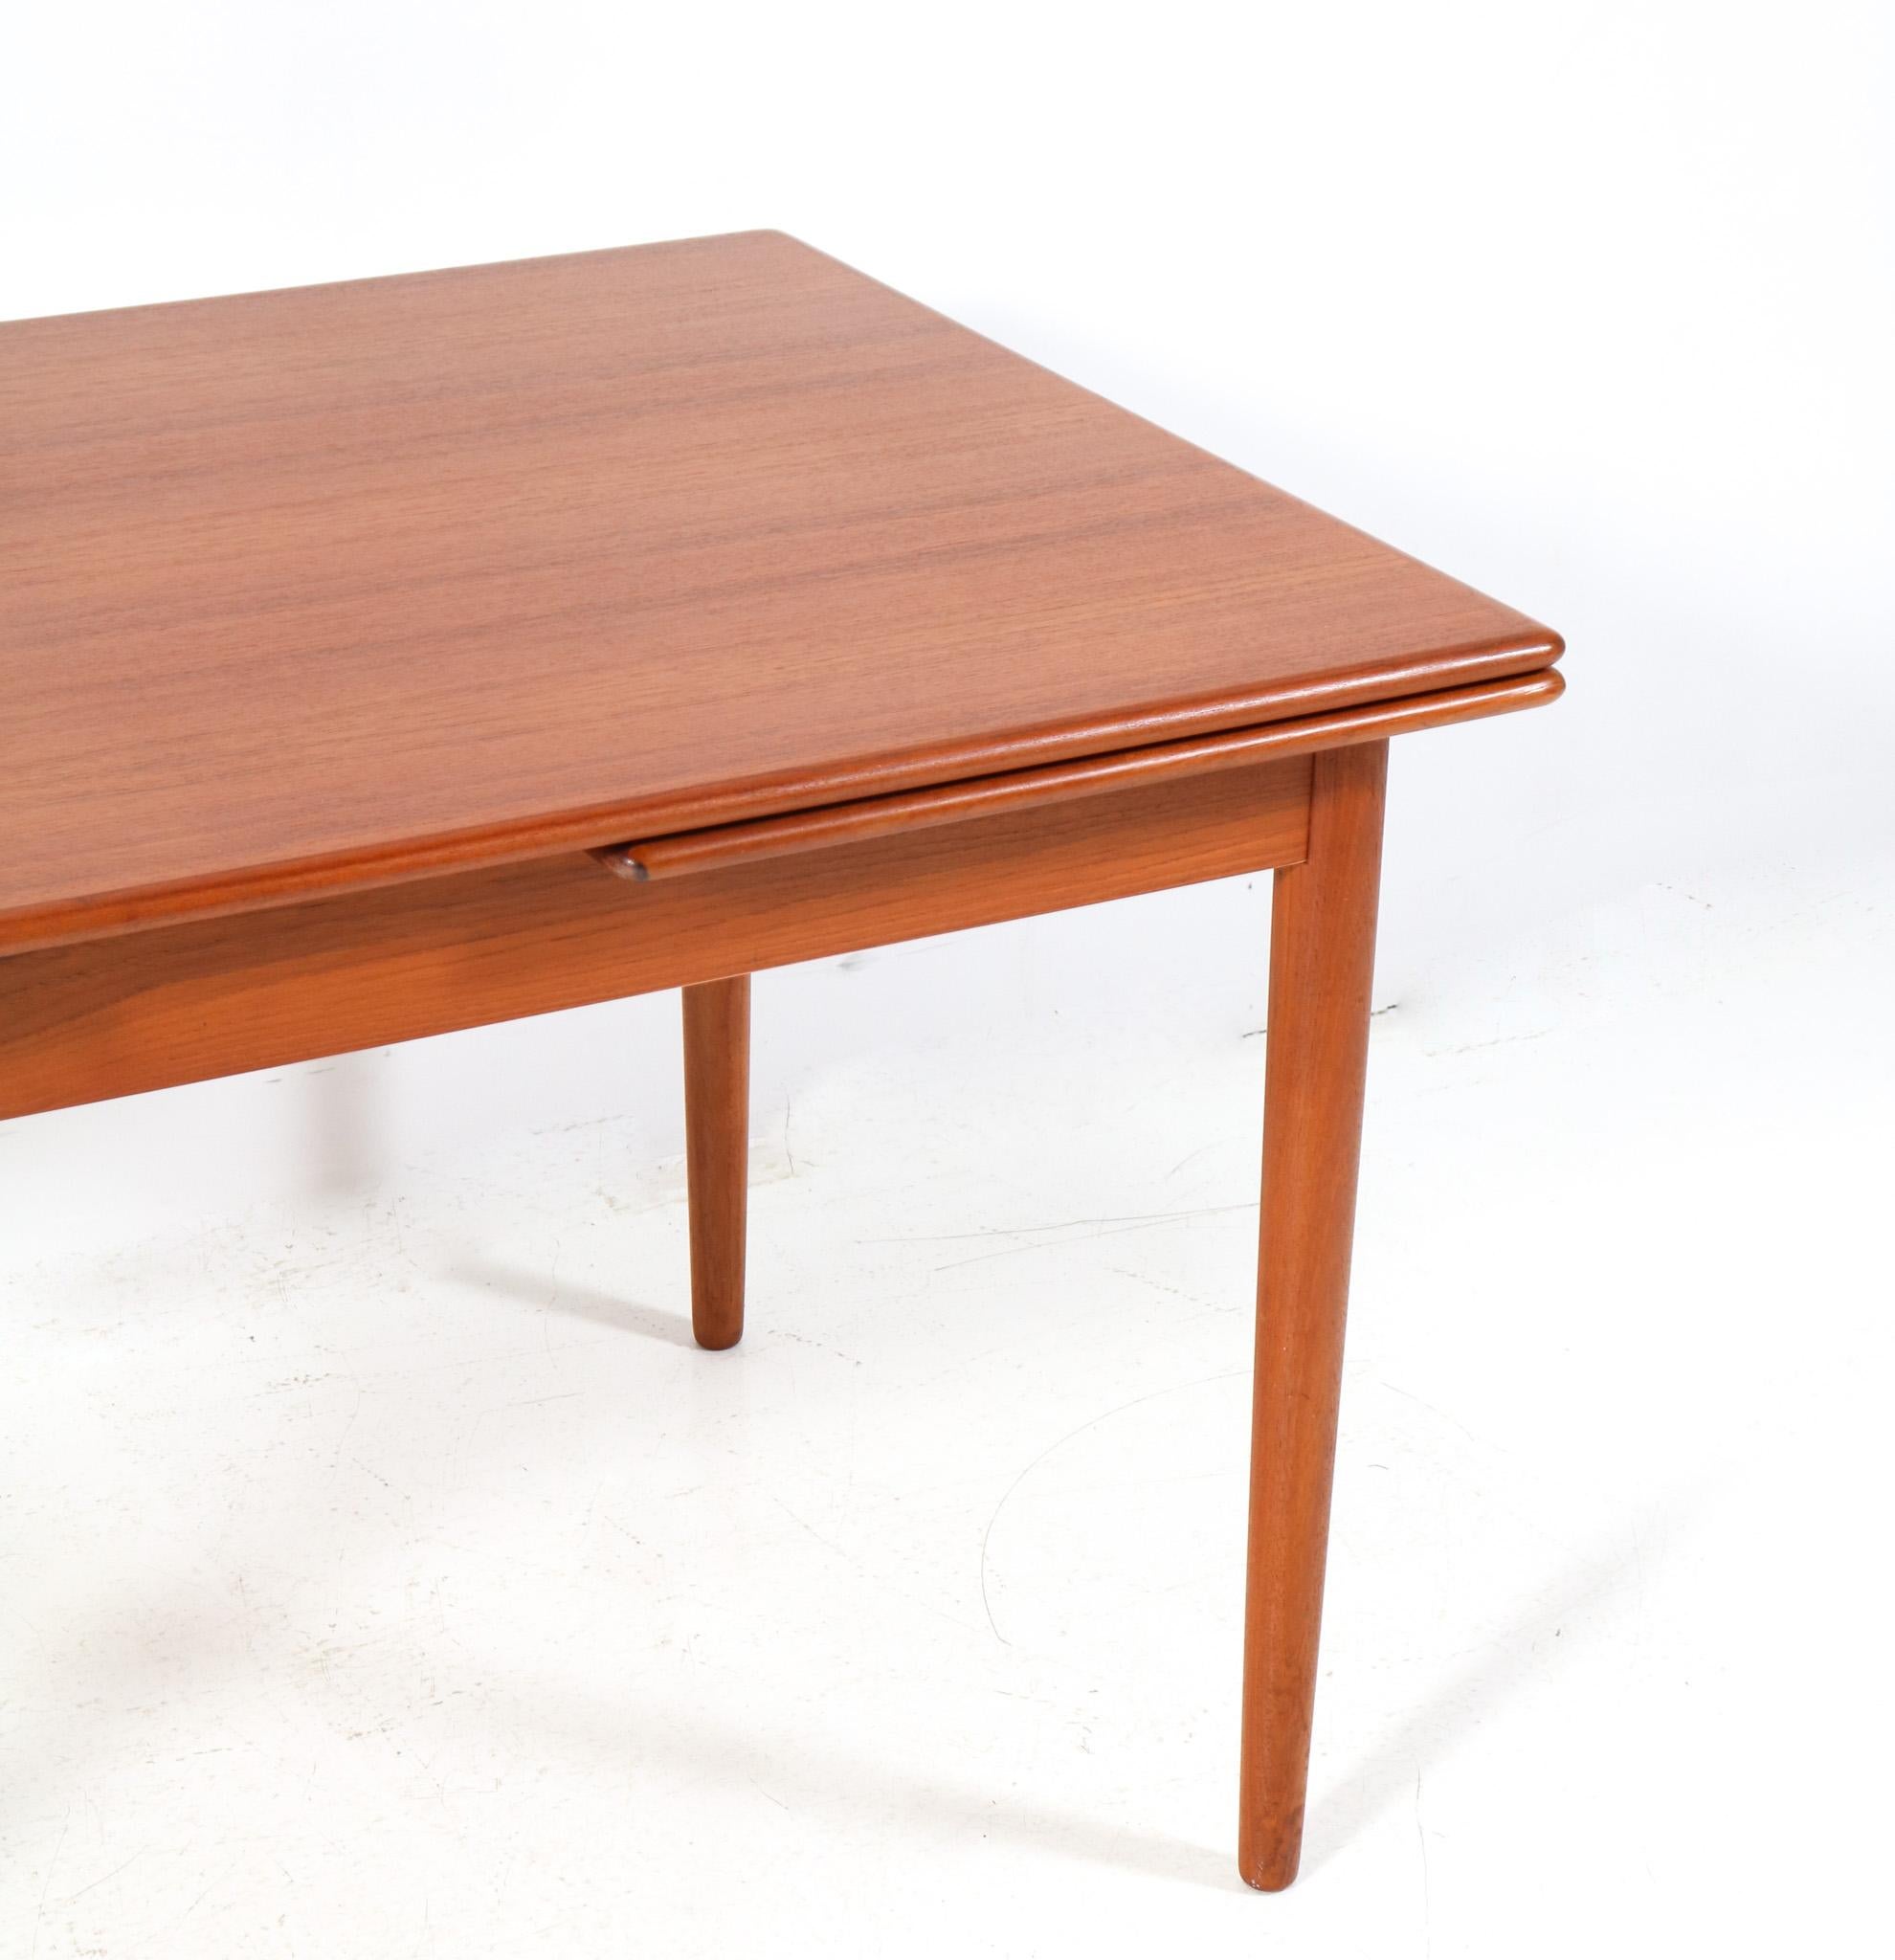 Teak Mid-Century Modern Extendable Dining Room Table Mo. 215 by Farstrup, 1960s In Good Condition For Sale In Amsterdam, NL